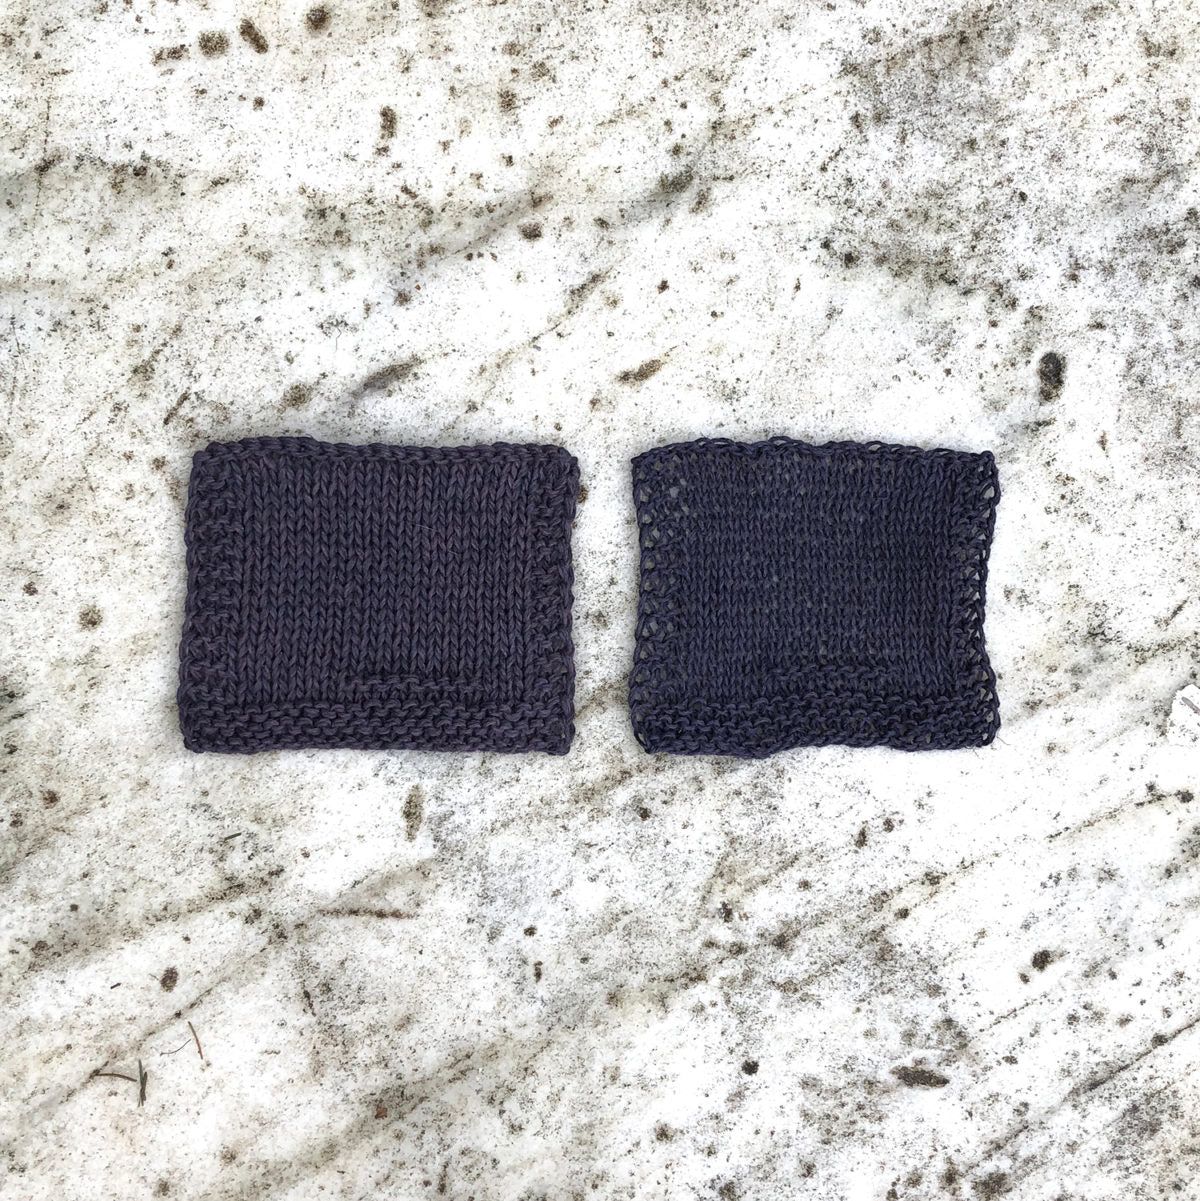 Two rectangular Kelbourne Woolens Mojave swatches before washing photographed on a textured marble background